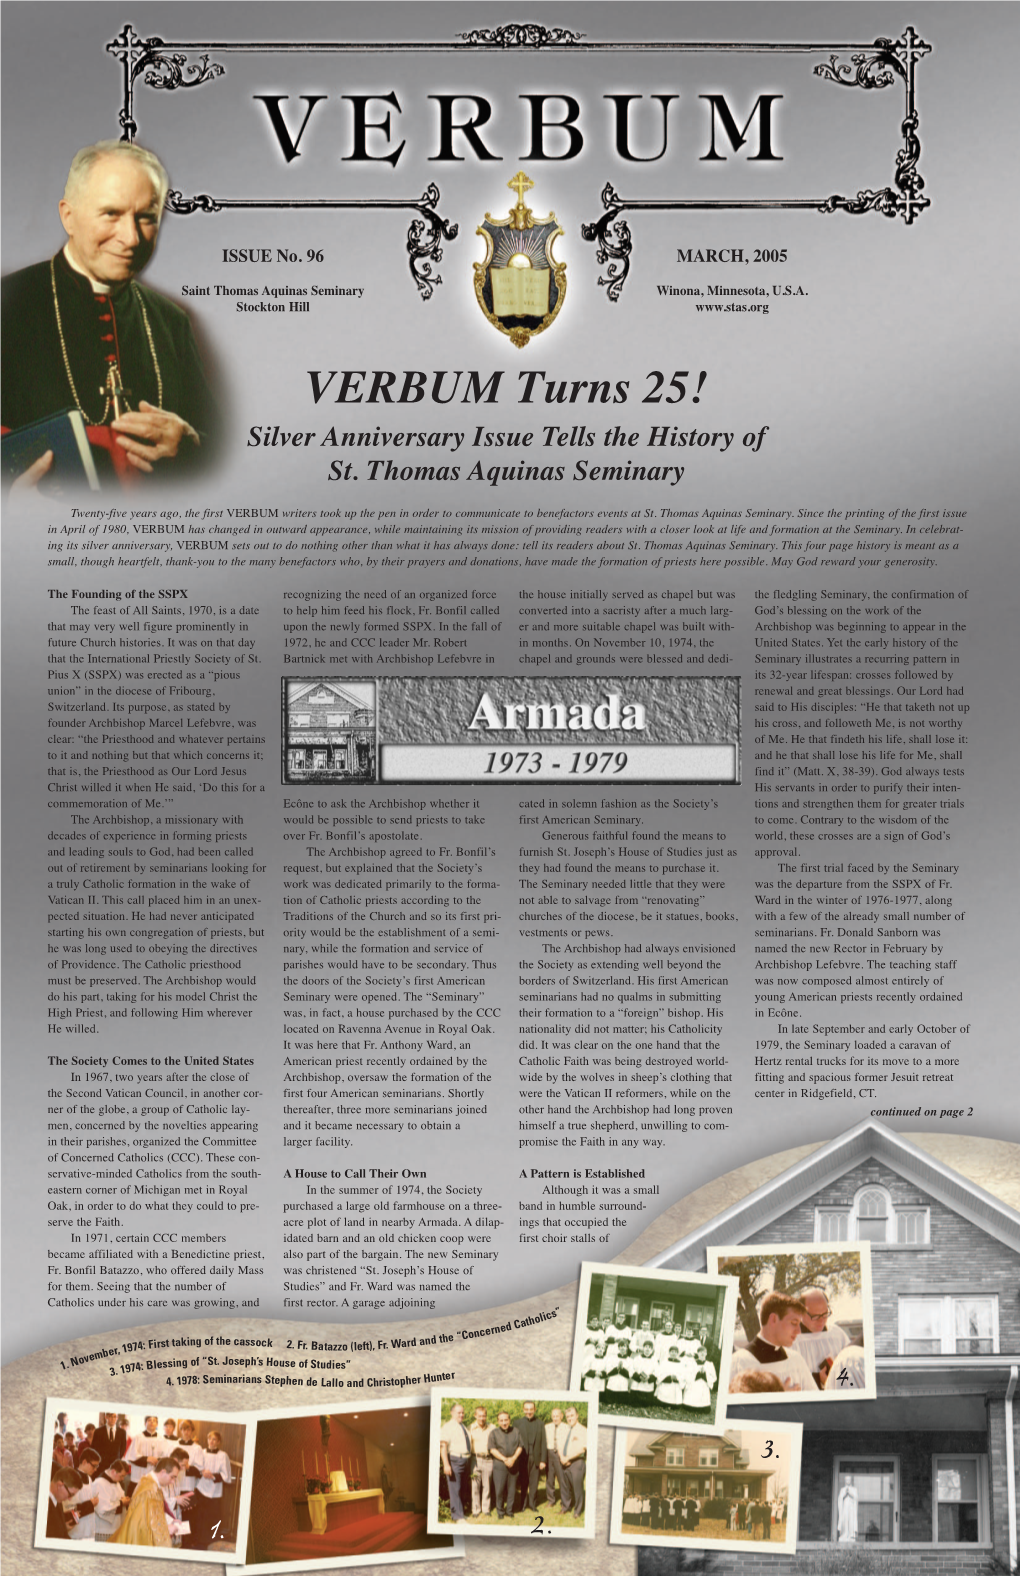 VERBUM Turns 25! Silver Anniversary Issue Tells the History of St